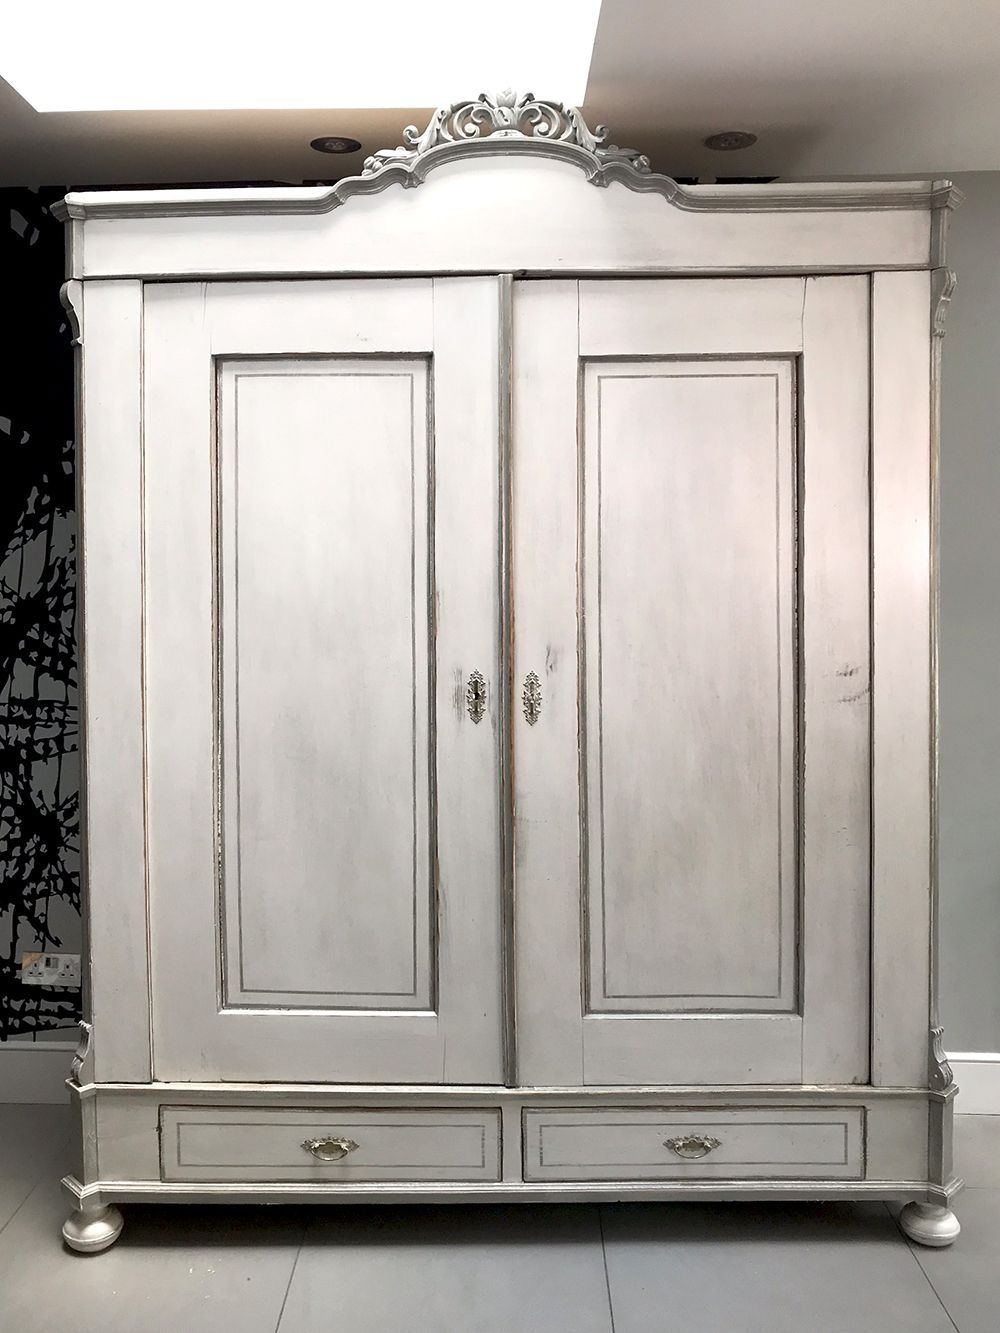 Antique French Painted Armoire – Sold | Napoleonrockefeller – Vintage And  Retro Furniture, Bespoke Hand Crafted Chairs And Seating For French Armoire Wardrobes (Gallery 16 of 20)